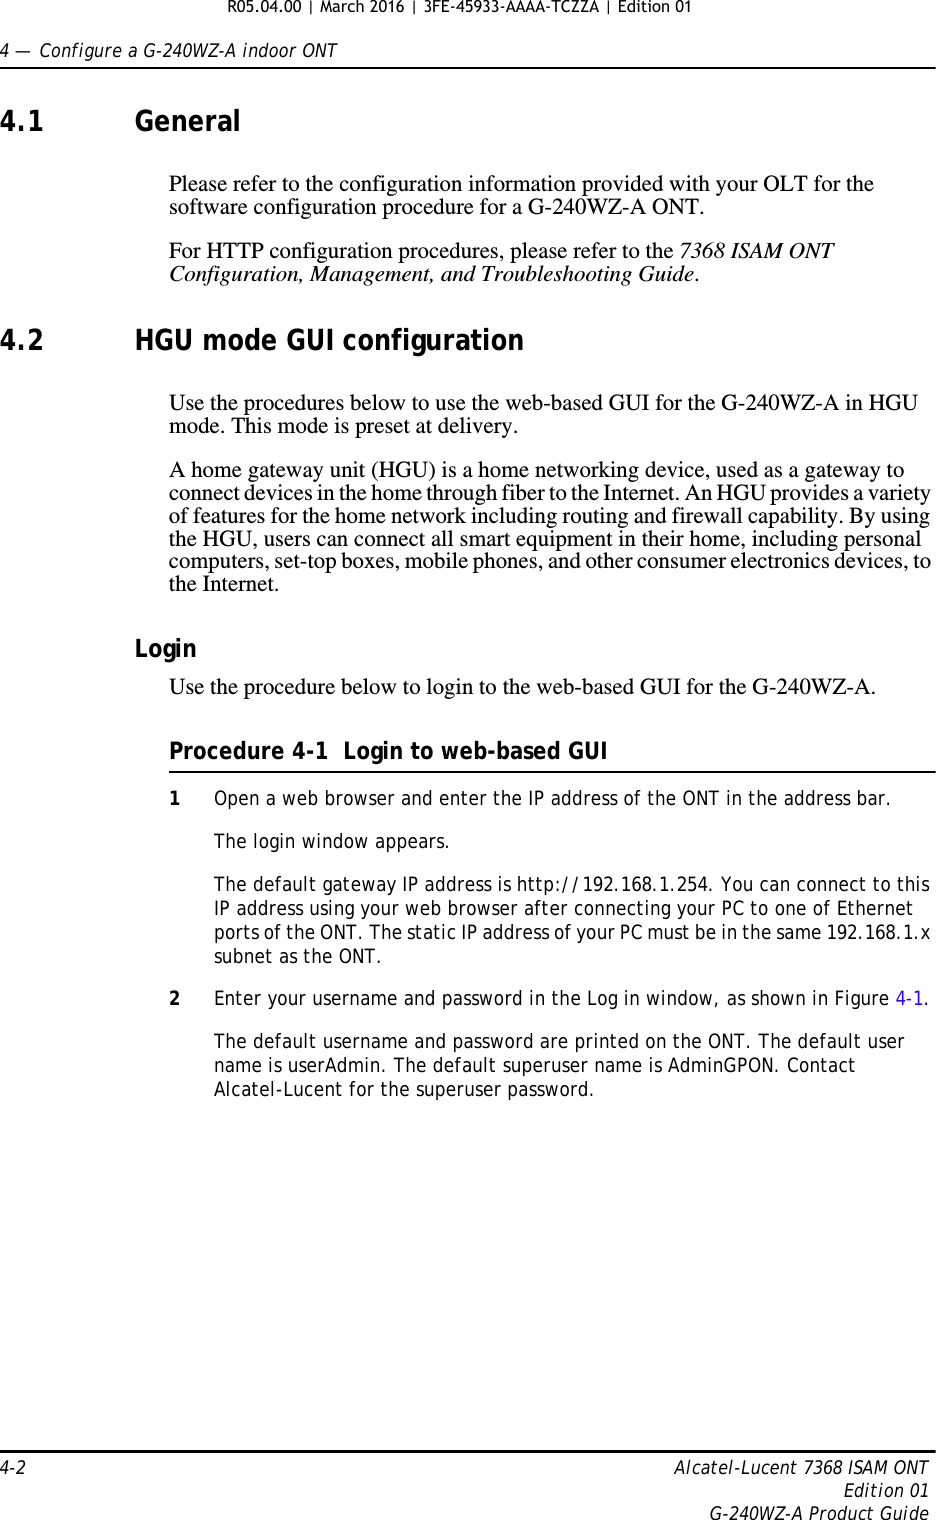 4 —  Configure a G-240WZ-A indoor ONT4-2 Alcatel-Lucent 7368 ISAM ONTEdition 01G-240WZ-A Product Guide4.1 GeneralPlease refer to the configuration information provided with your OLT for the software configuration procedure for a G-240WZ-A ONT.For HTTP configuration procedures, please refer to the 7368 ISAM ONT Configuration, Management, and Troubleshooting Guide.4.2 HGU mode GUI configurationUse the procedures below to use the web-based GUI for the G-240WZ-A in HGU mode. This mode is preset at delivery.A home gateway unit (HGU) is a home networking device, used as a gateway to connect devices in the home through fiber to the Internet. An HGU provides a variety of features for the home network including routing and firewall capability. By using the HGU, users can connect all smart equipment in their home, including personal computers, set-top boxes, mobile phones, and other consumer electronics devices, to the Internet.LoginUse the procedure below to login to the web-based GUI for the G-240WZ-A.Procedure 4-1  Login to web-based GUI1Open a web browser and enter the IP address of the ONT in the address bar.The login window appears. The default gateway IP address is http://192.168.1.254. You can connect to this IP address using your web browser after connecting your PC to one of Ethernet ports of the ONT. The static IP address of your PC must be in the same 192.168.1.x subnet as the ONT.2Enter your username and password in the Log in window, as shown in Figure 4-1.The default username and password are printed on the ONT. The default user name is userAdmin. The default superuser name is AdminGPON. Contact Alcatel-Lucent for the superuser password.R05.04.00 | March 2016 | 3FE-45933-AAAA-TCZZA | Edition 01 